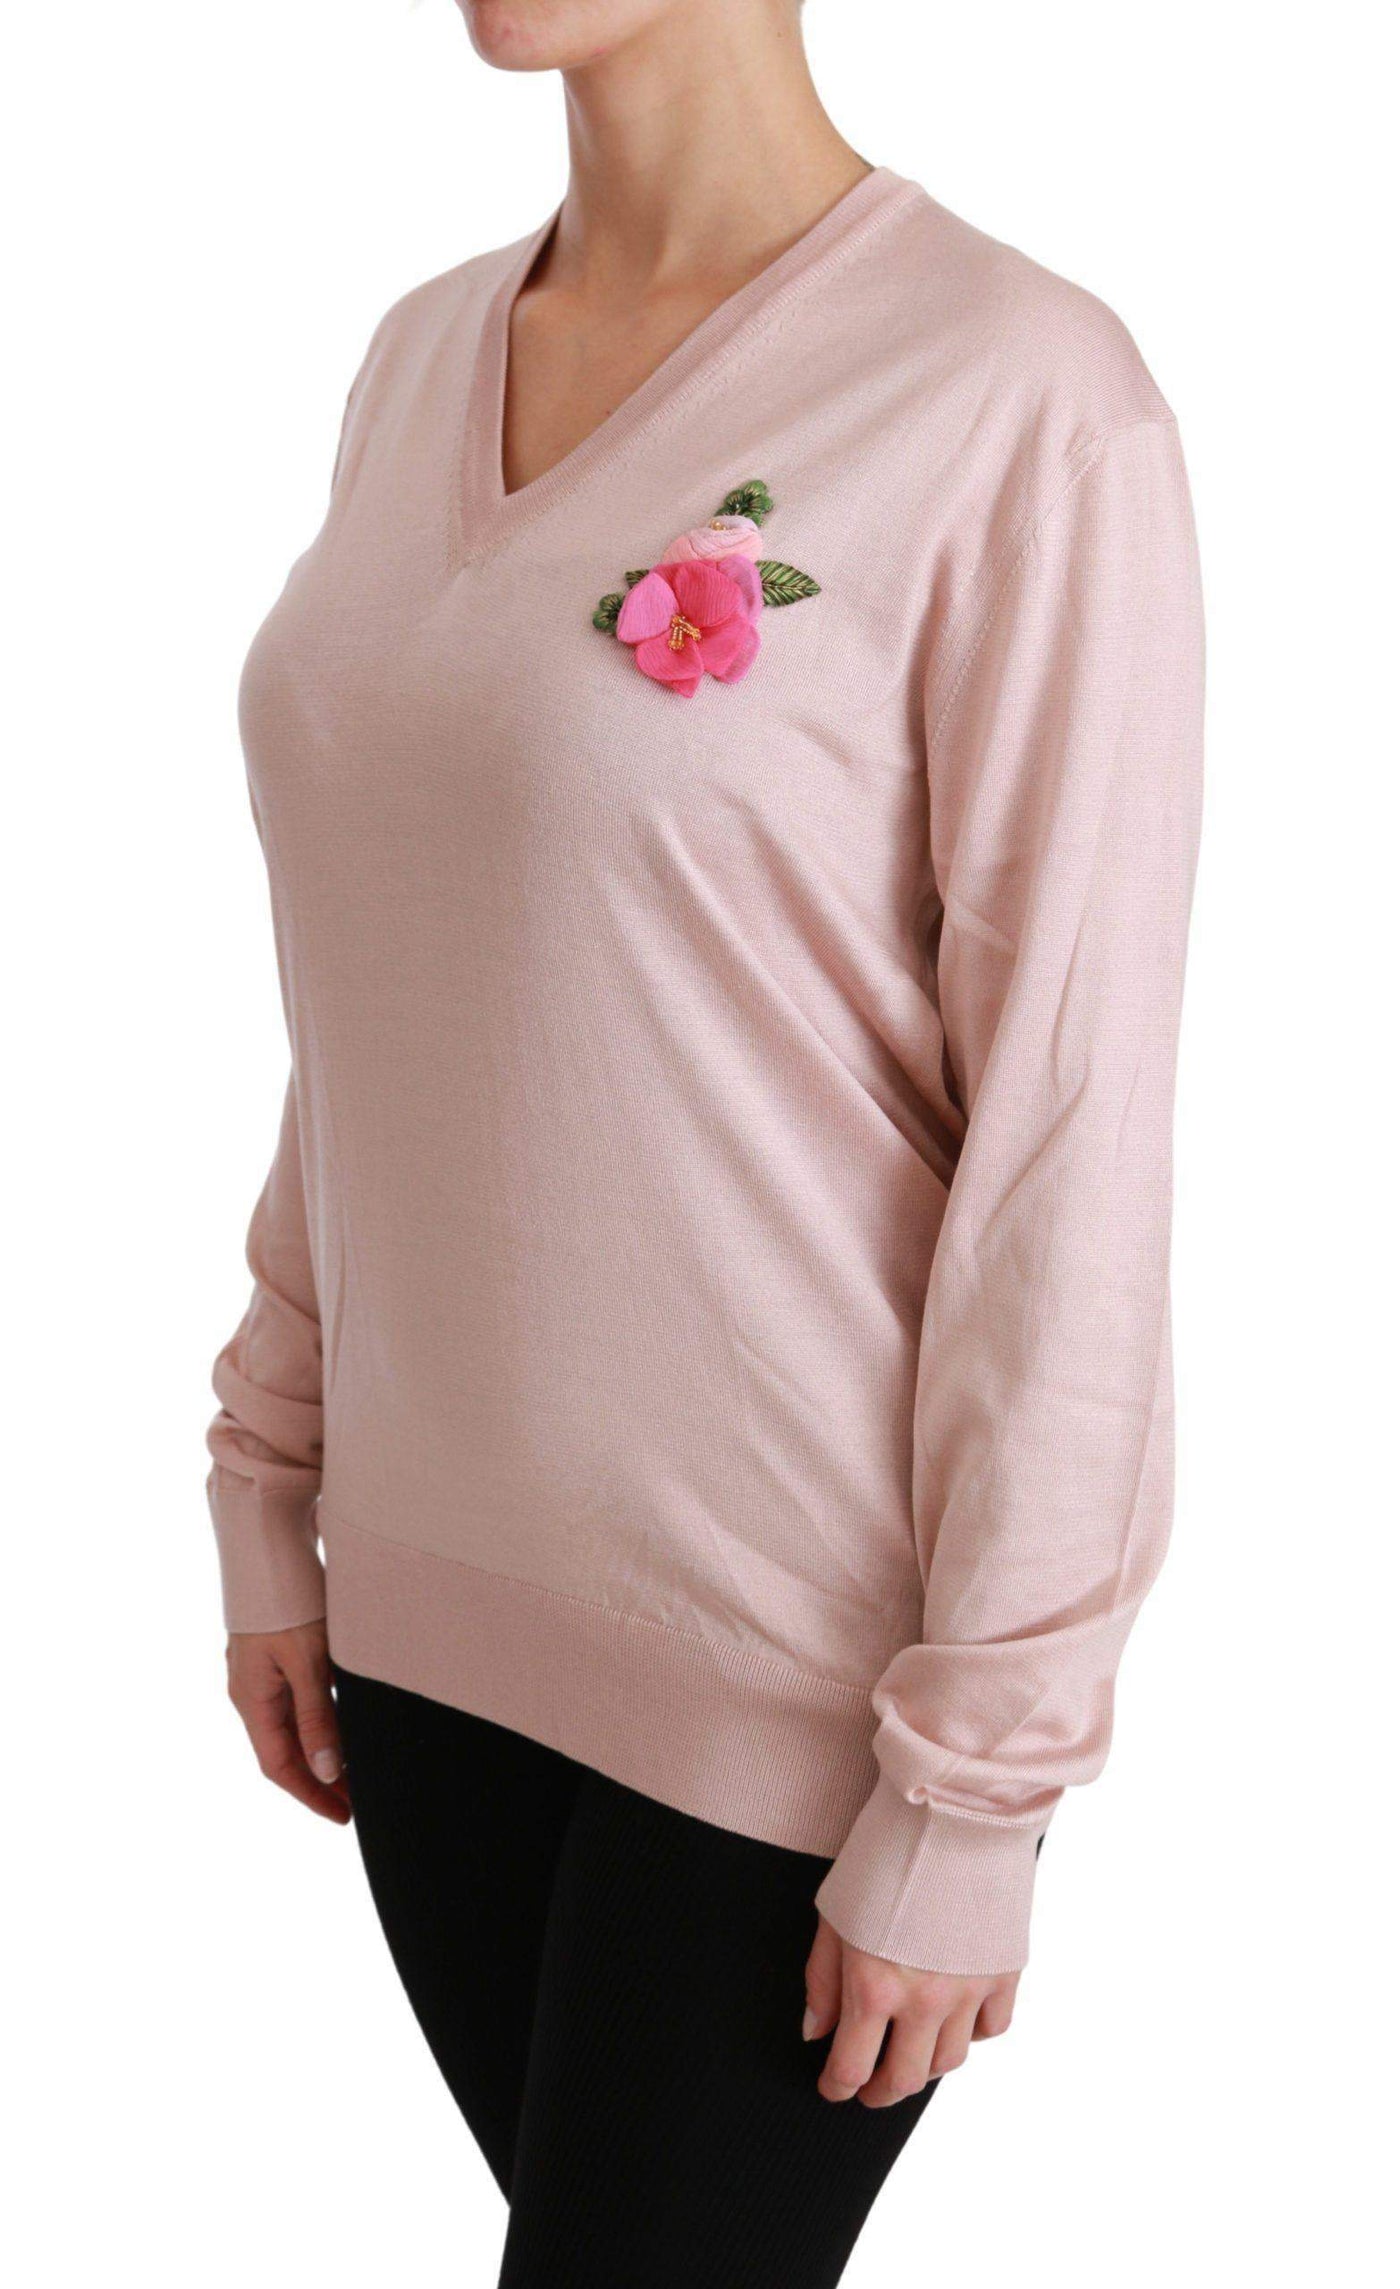 Dolce & Gabbana  Pink Floral Embellished Pullover Silk Sweater #women, Brand_Dolce & Gabbana, Catch, Dolce & Gabbana, feed-agegroup-adult, feed-color-pink, feed-gender-female, feed-size-IT36 | XS, feed-size-IT42|M, feed-size-IT44|L, feed-size-IT46|XL, Gender_Women, IT36 | XS, IT42|M, IT44|L, IT46|XL, Kogan, Pink, Sweaters - Women - Clothing, Women - New Arrivals at SEYMAYKA